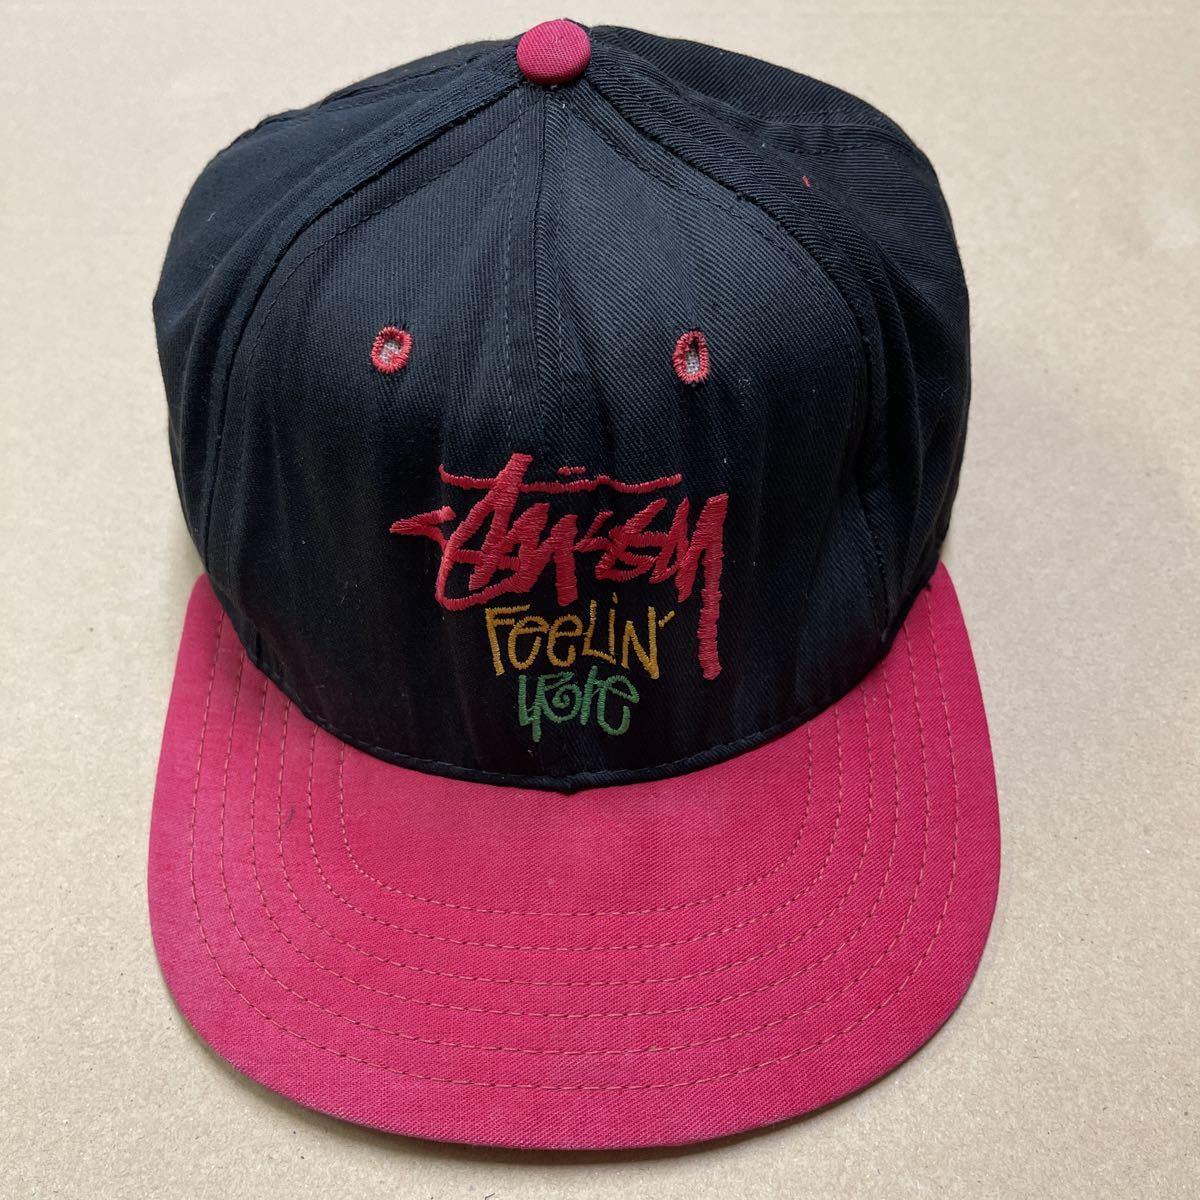 OLD STUSSY キャップ 帽子 ヴィンテージ フリーサイズ アメリカ製 ステューシー CAP 古着 MADE IN USA